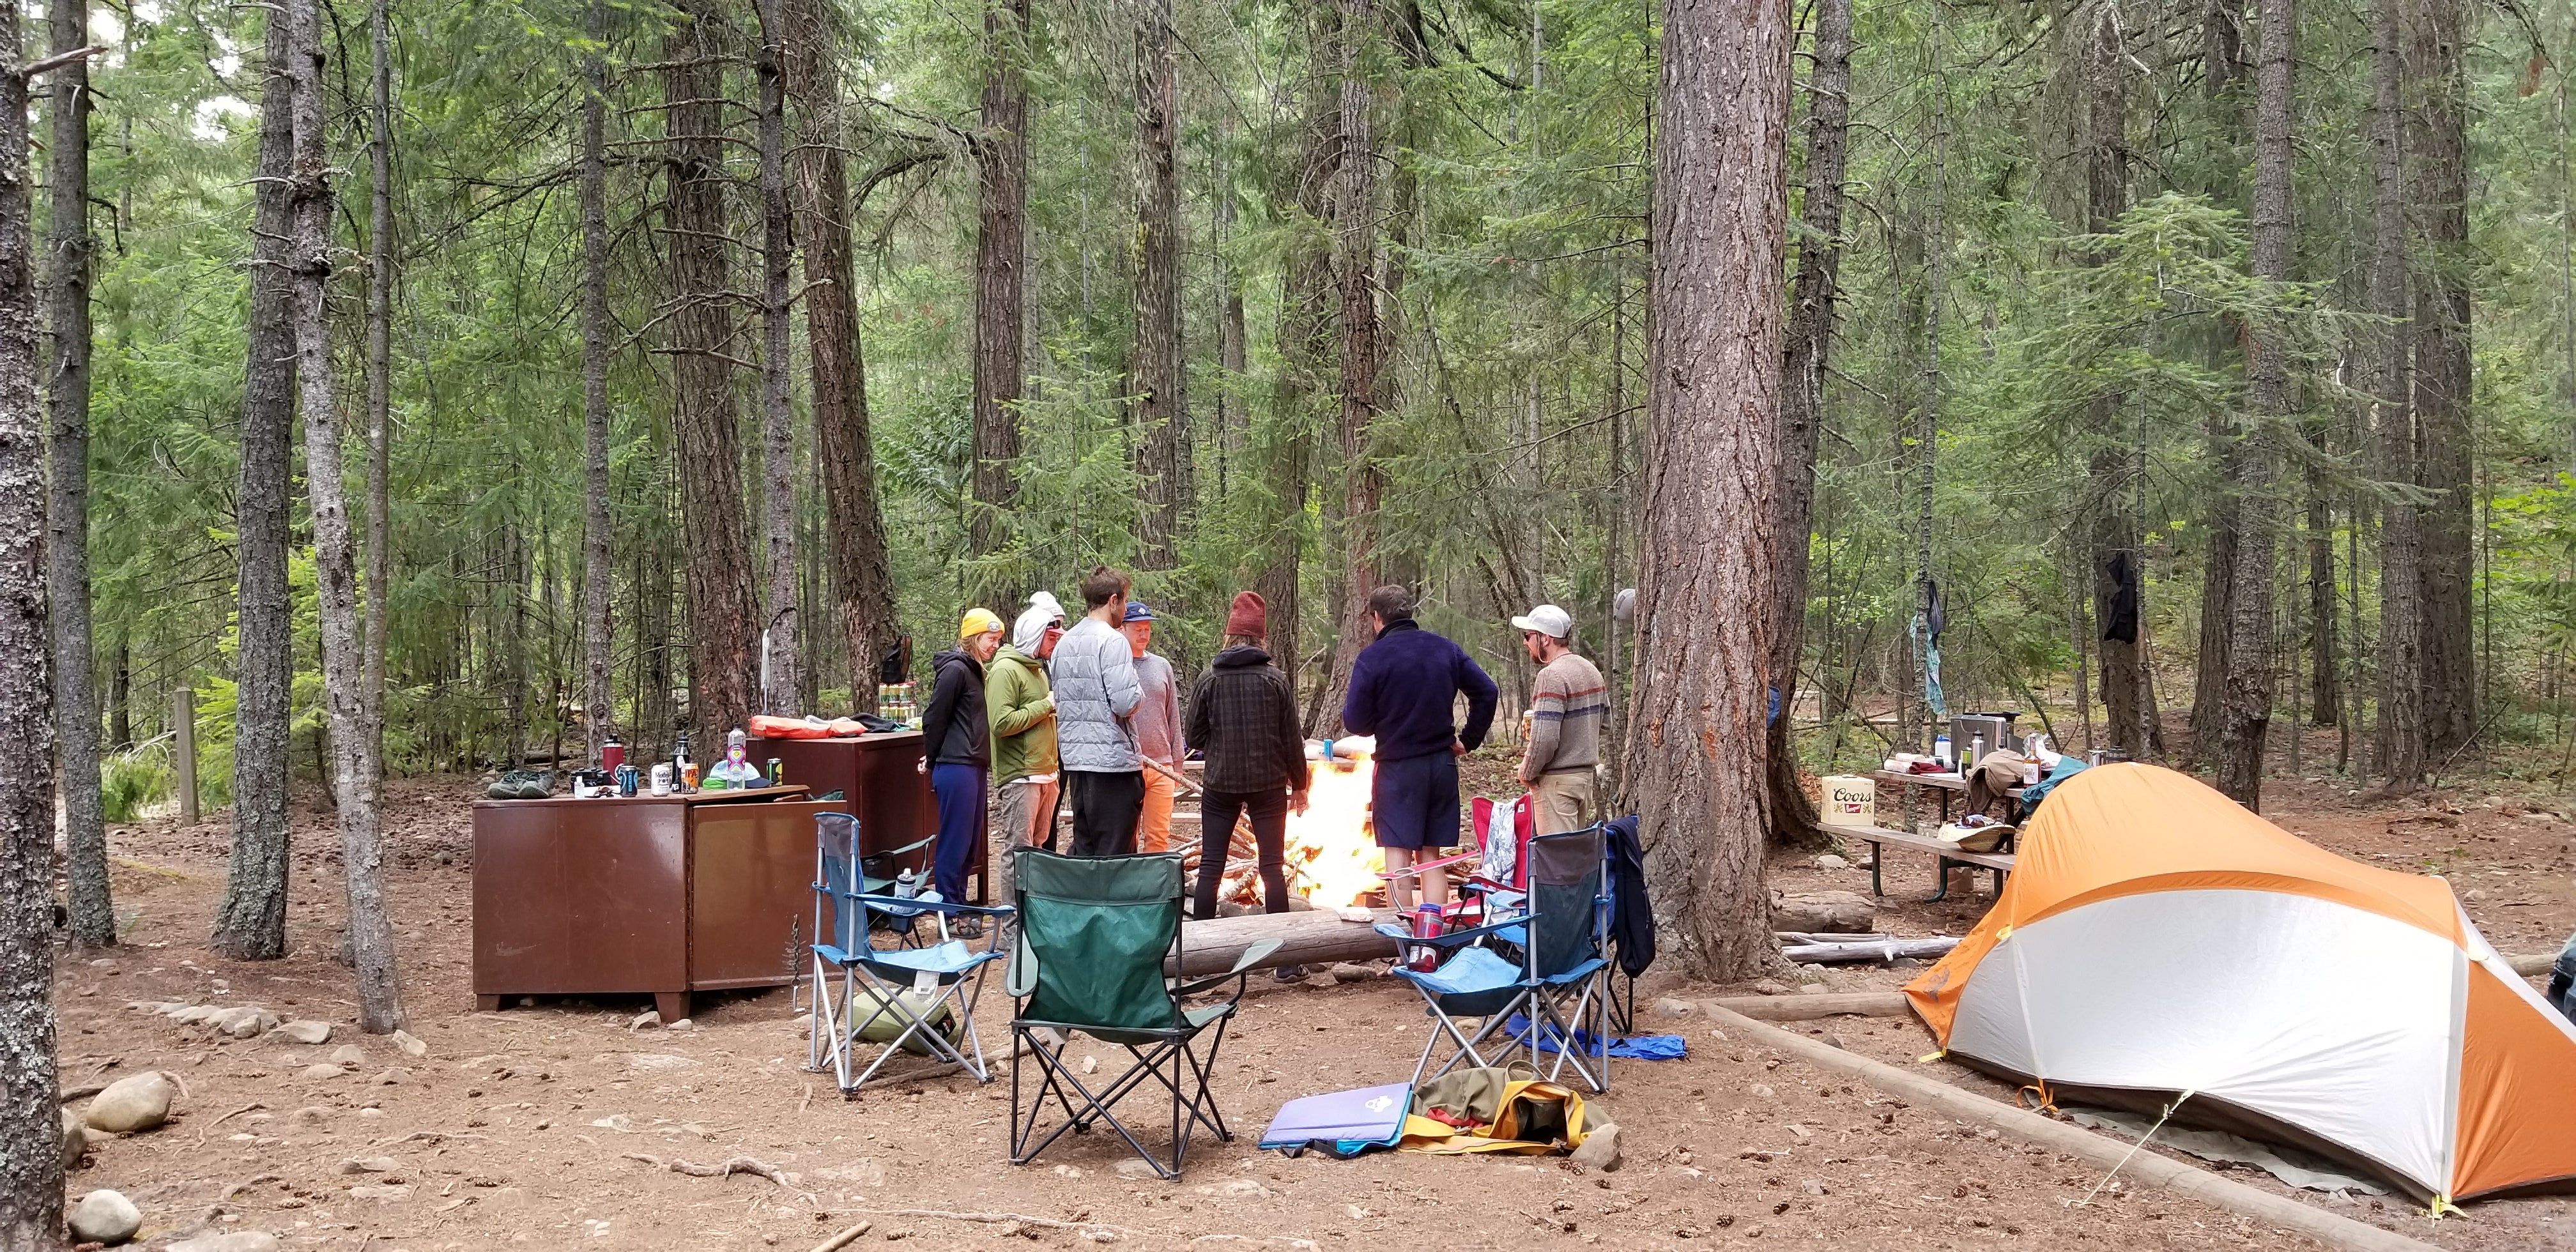 Bear boxes and 3 or 4 tent sites at this group site.